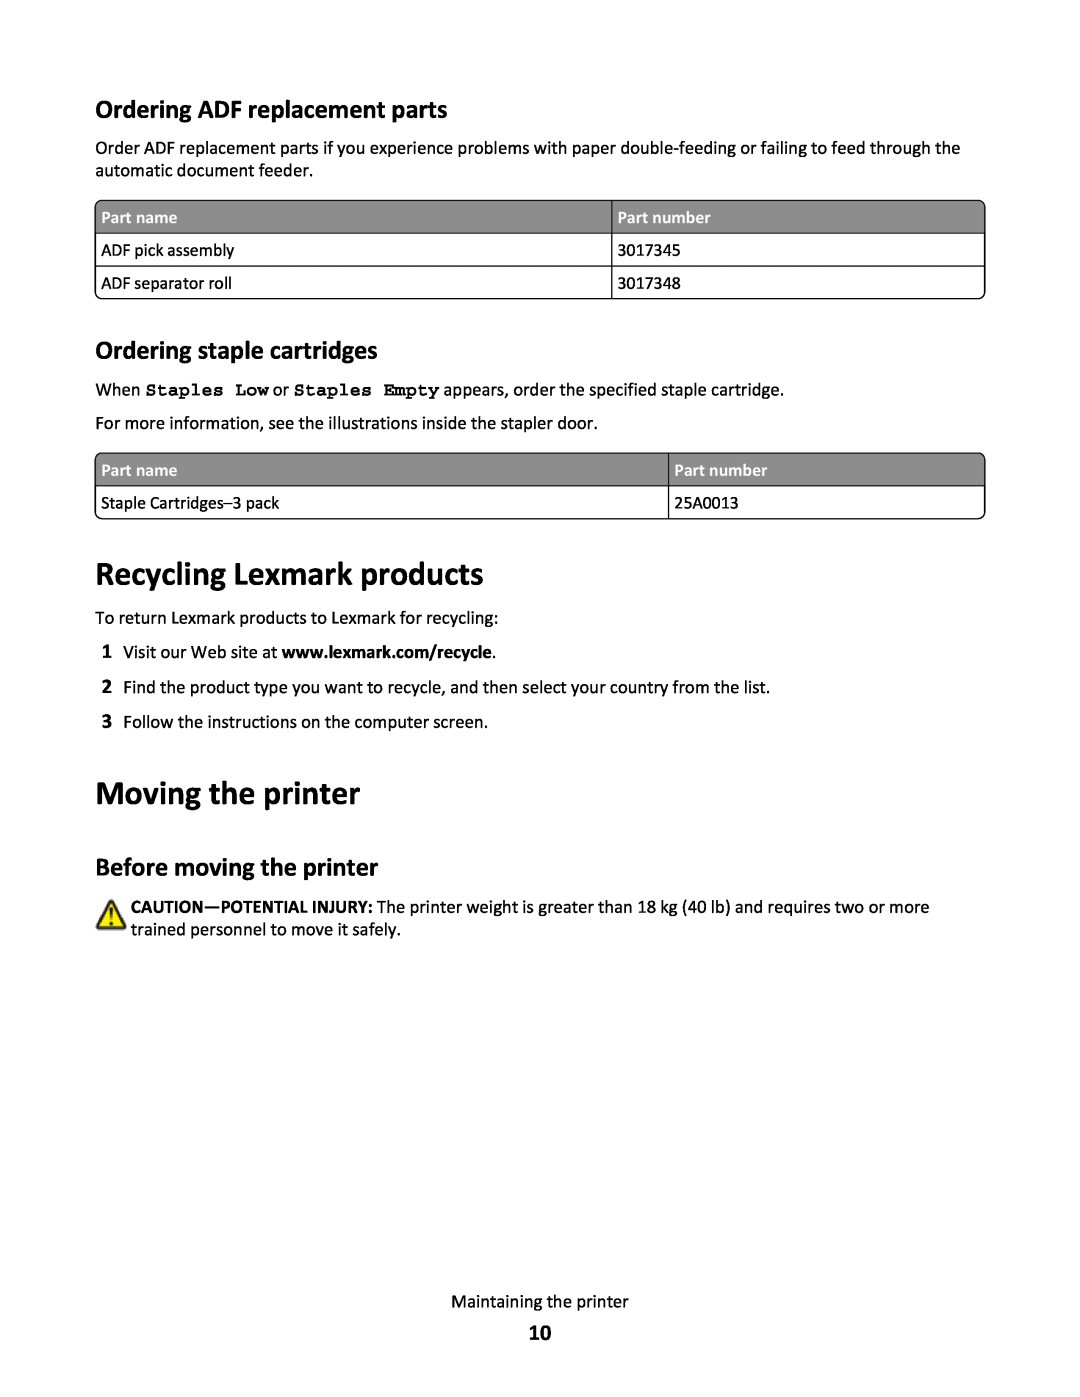 Lexmark X651de Recycling Lexmark products, Moving the printer, Ordering ADF replacement parts, Ordering staple cartridges 